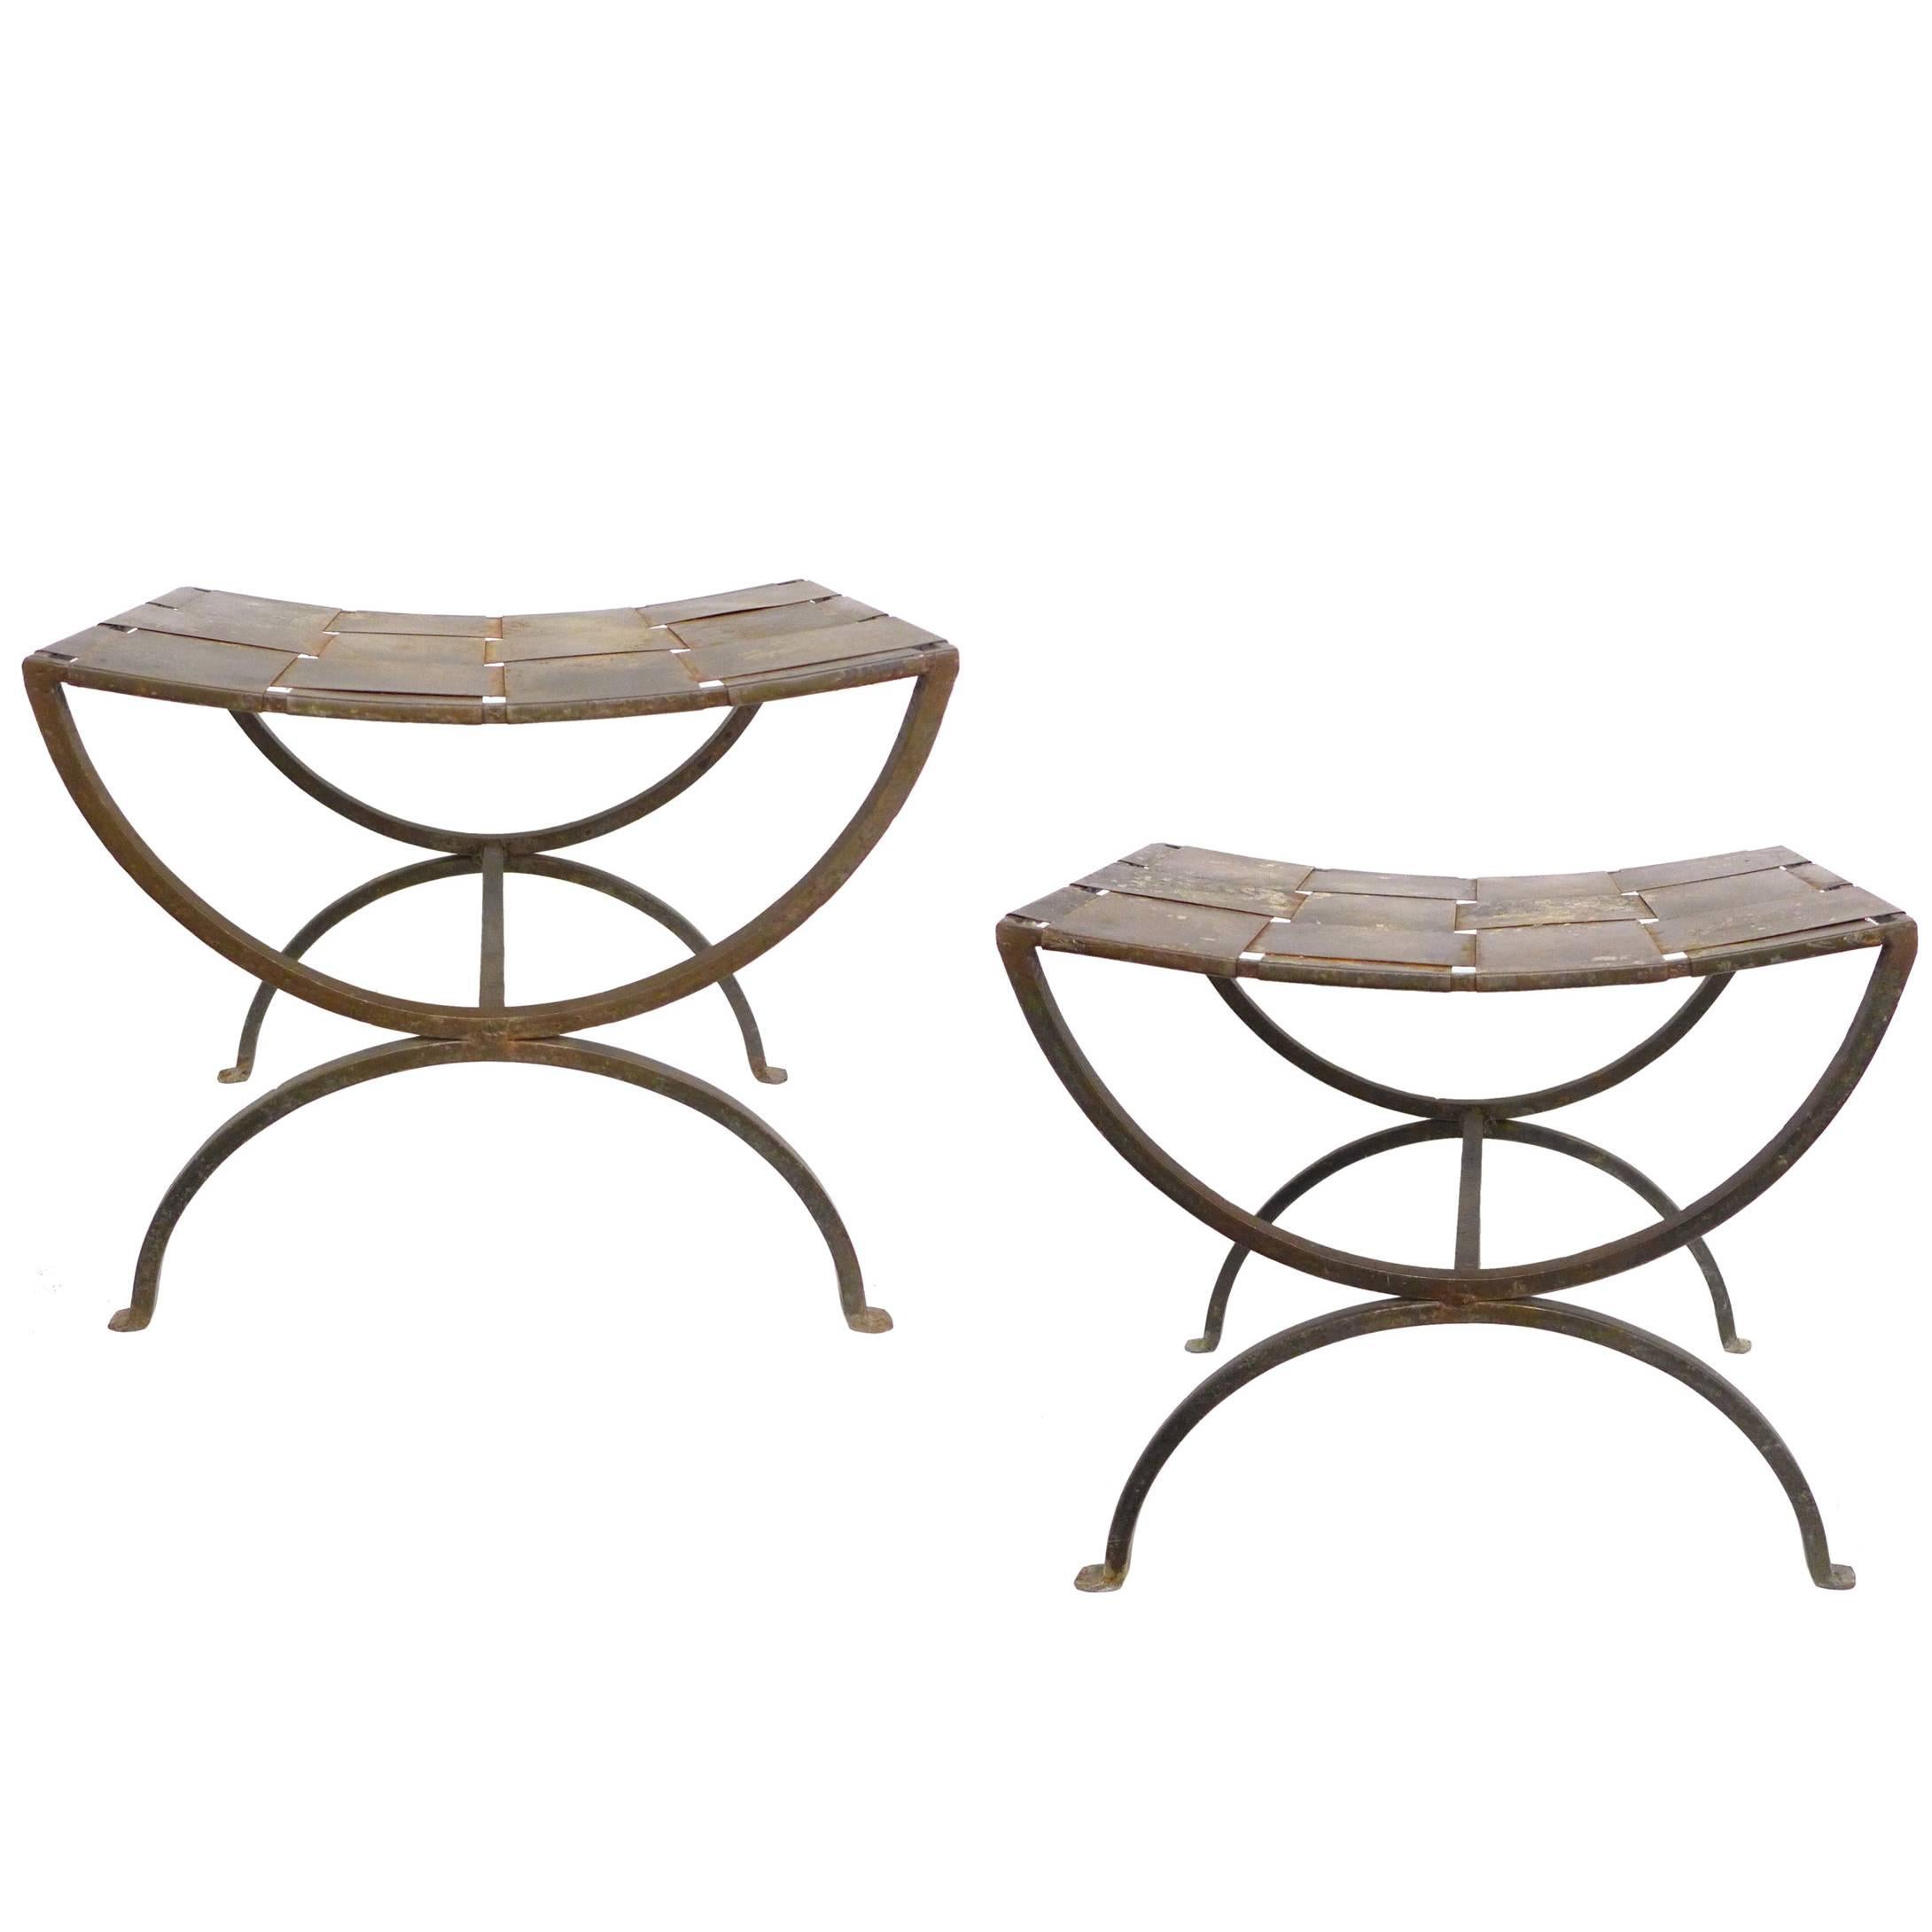 Pair of Wrought Iron Stools